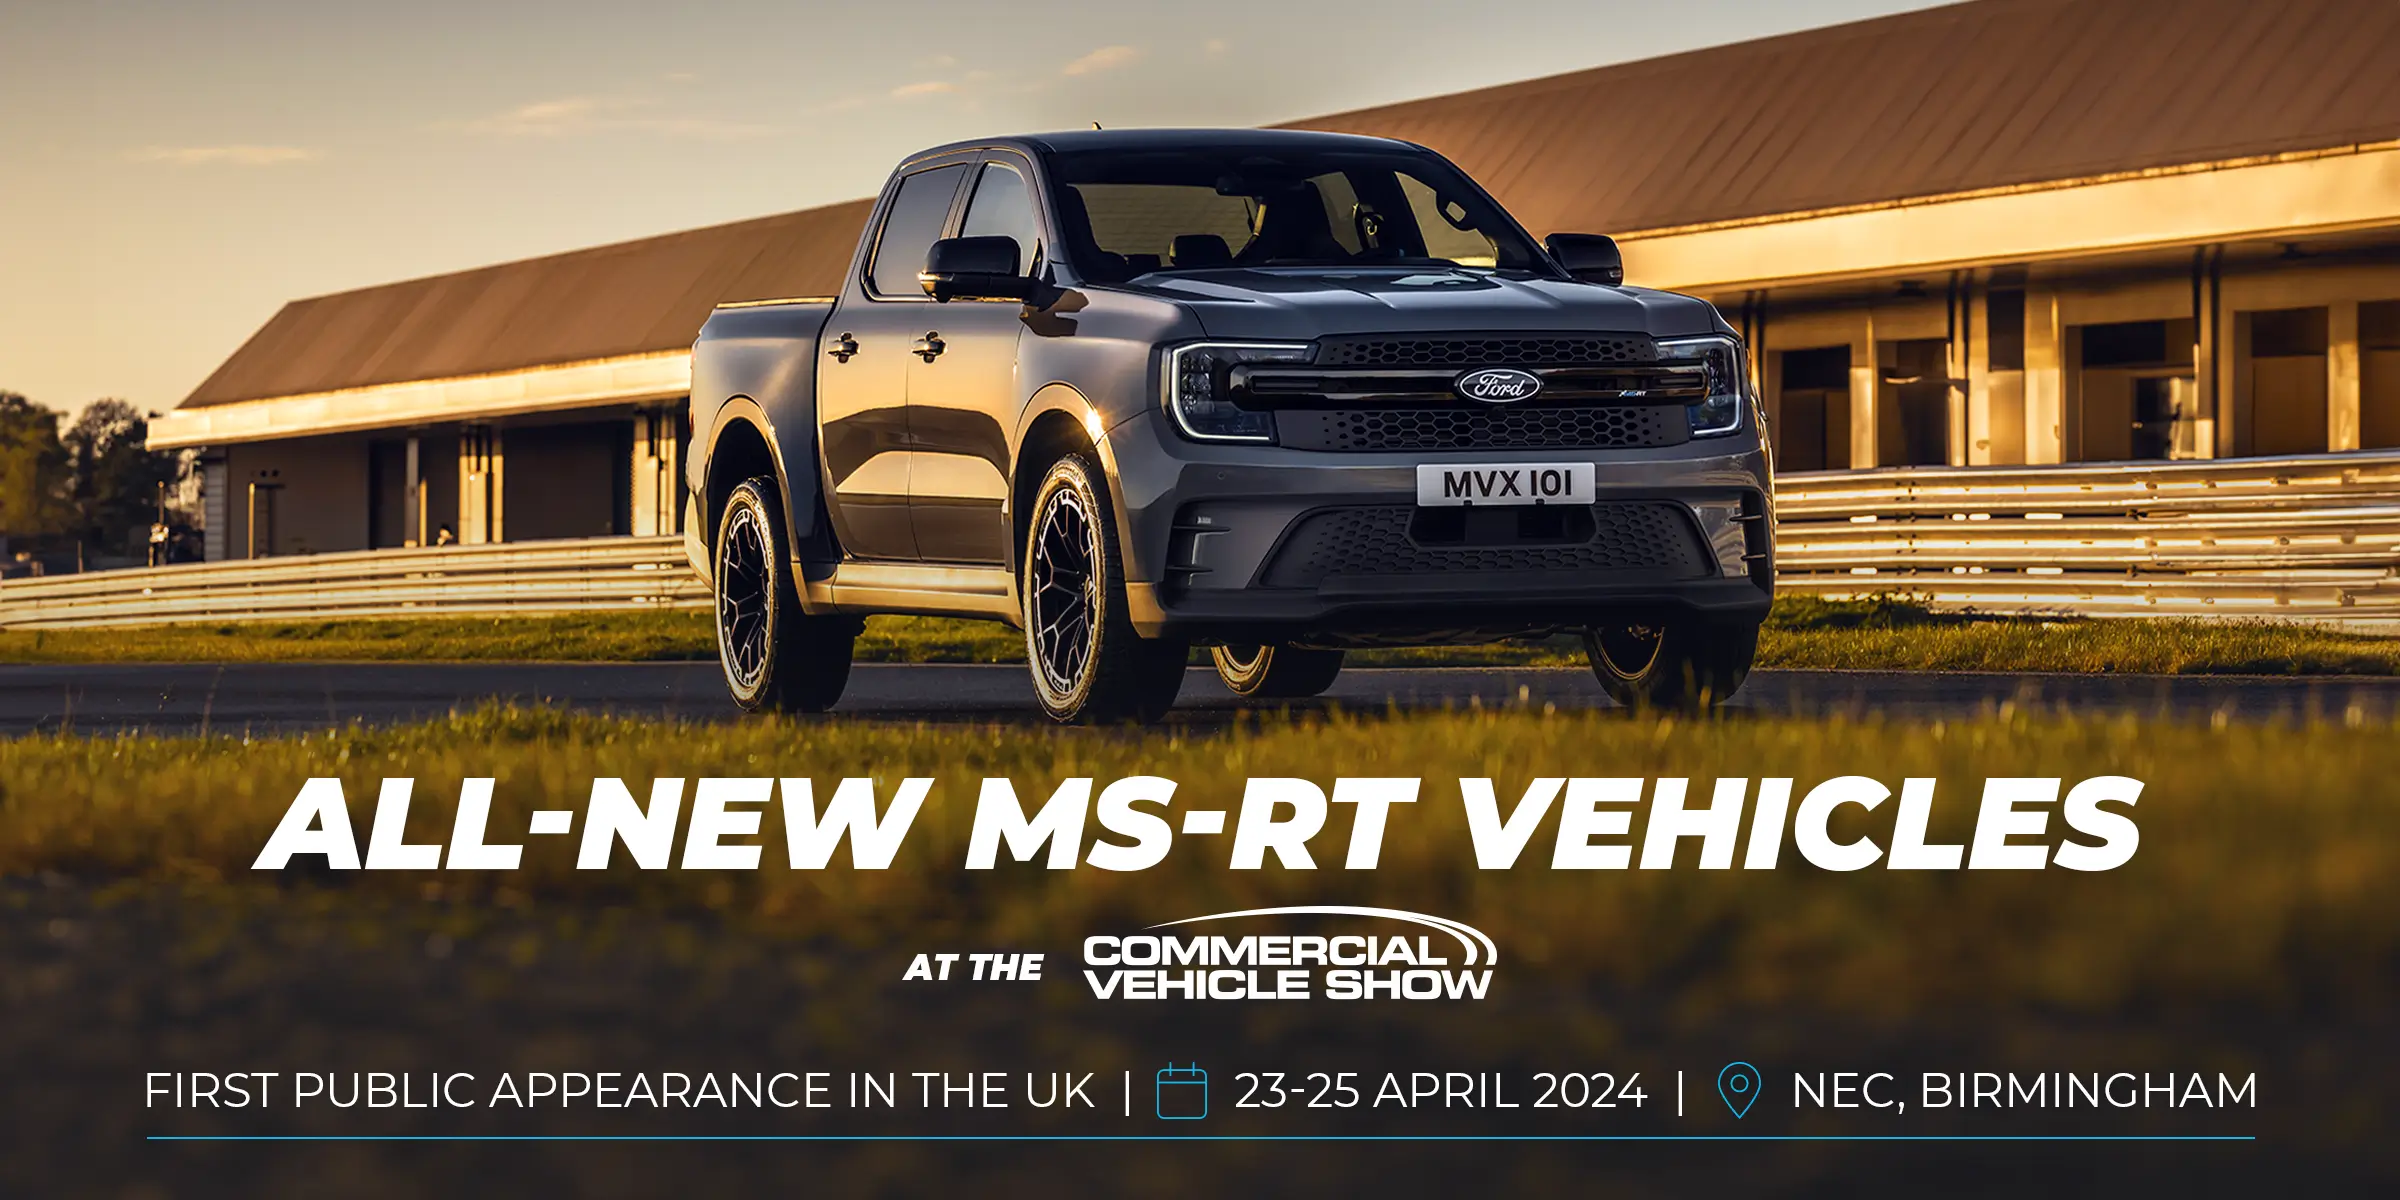 New vehicles at the Commercial Vehicle Show 23-25 April 2024